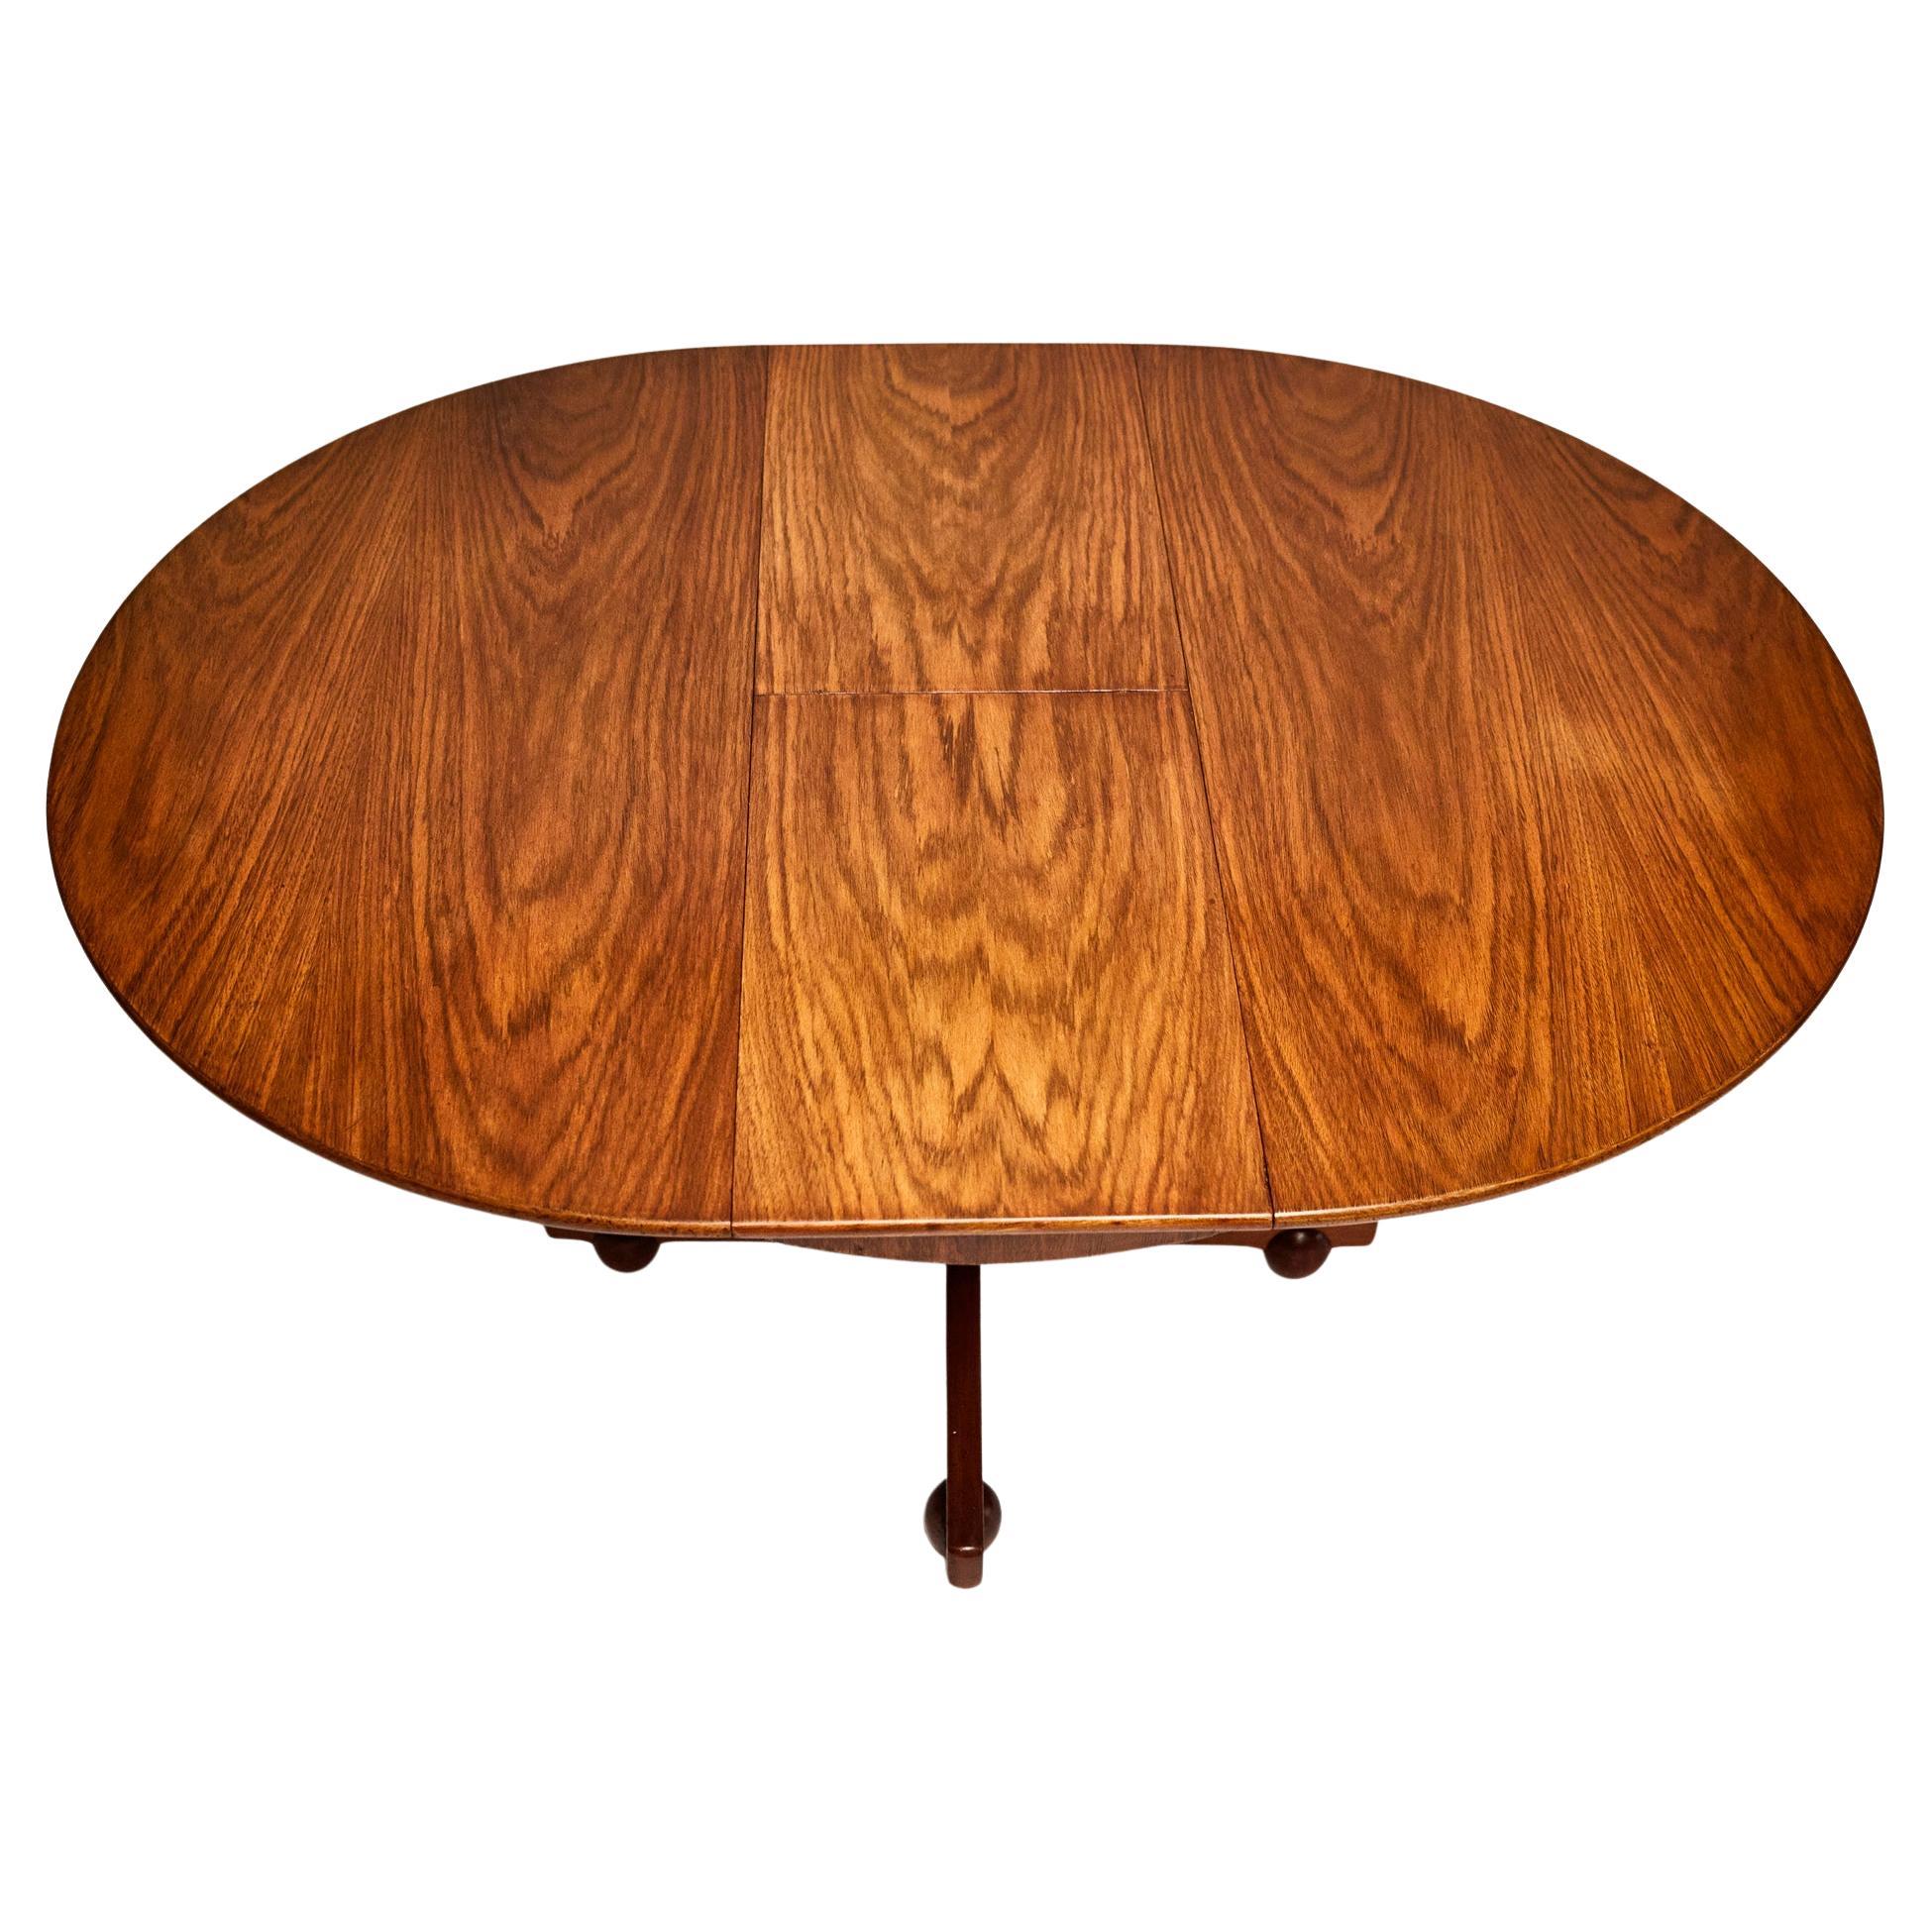 Available today, I love everything about this Midcentury Modern Circular Dining Table in Hardwood by Geraldo de Barros. 

This hardwood, midcentury modern table has an extendable circular top with base in “X” shape. The woodwork is impeccable,